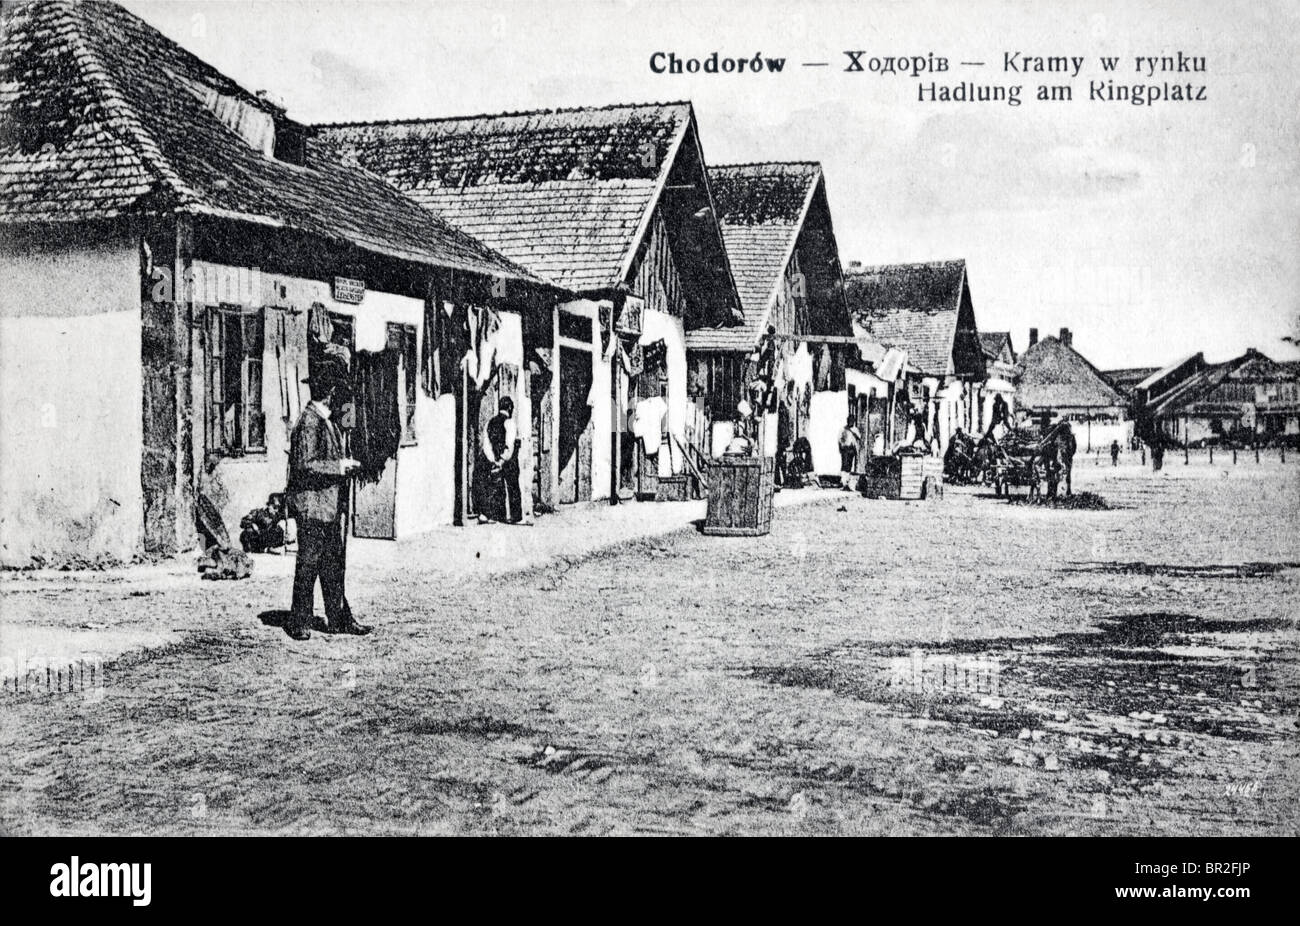 The market square at Chodorów, now Khodoriv, now in the Ukraine. Early 20th century. Stock Photo